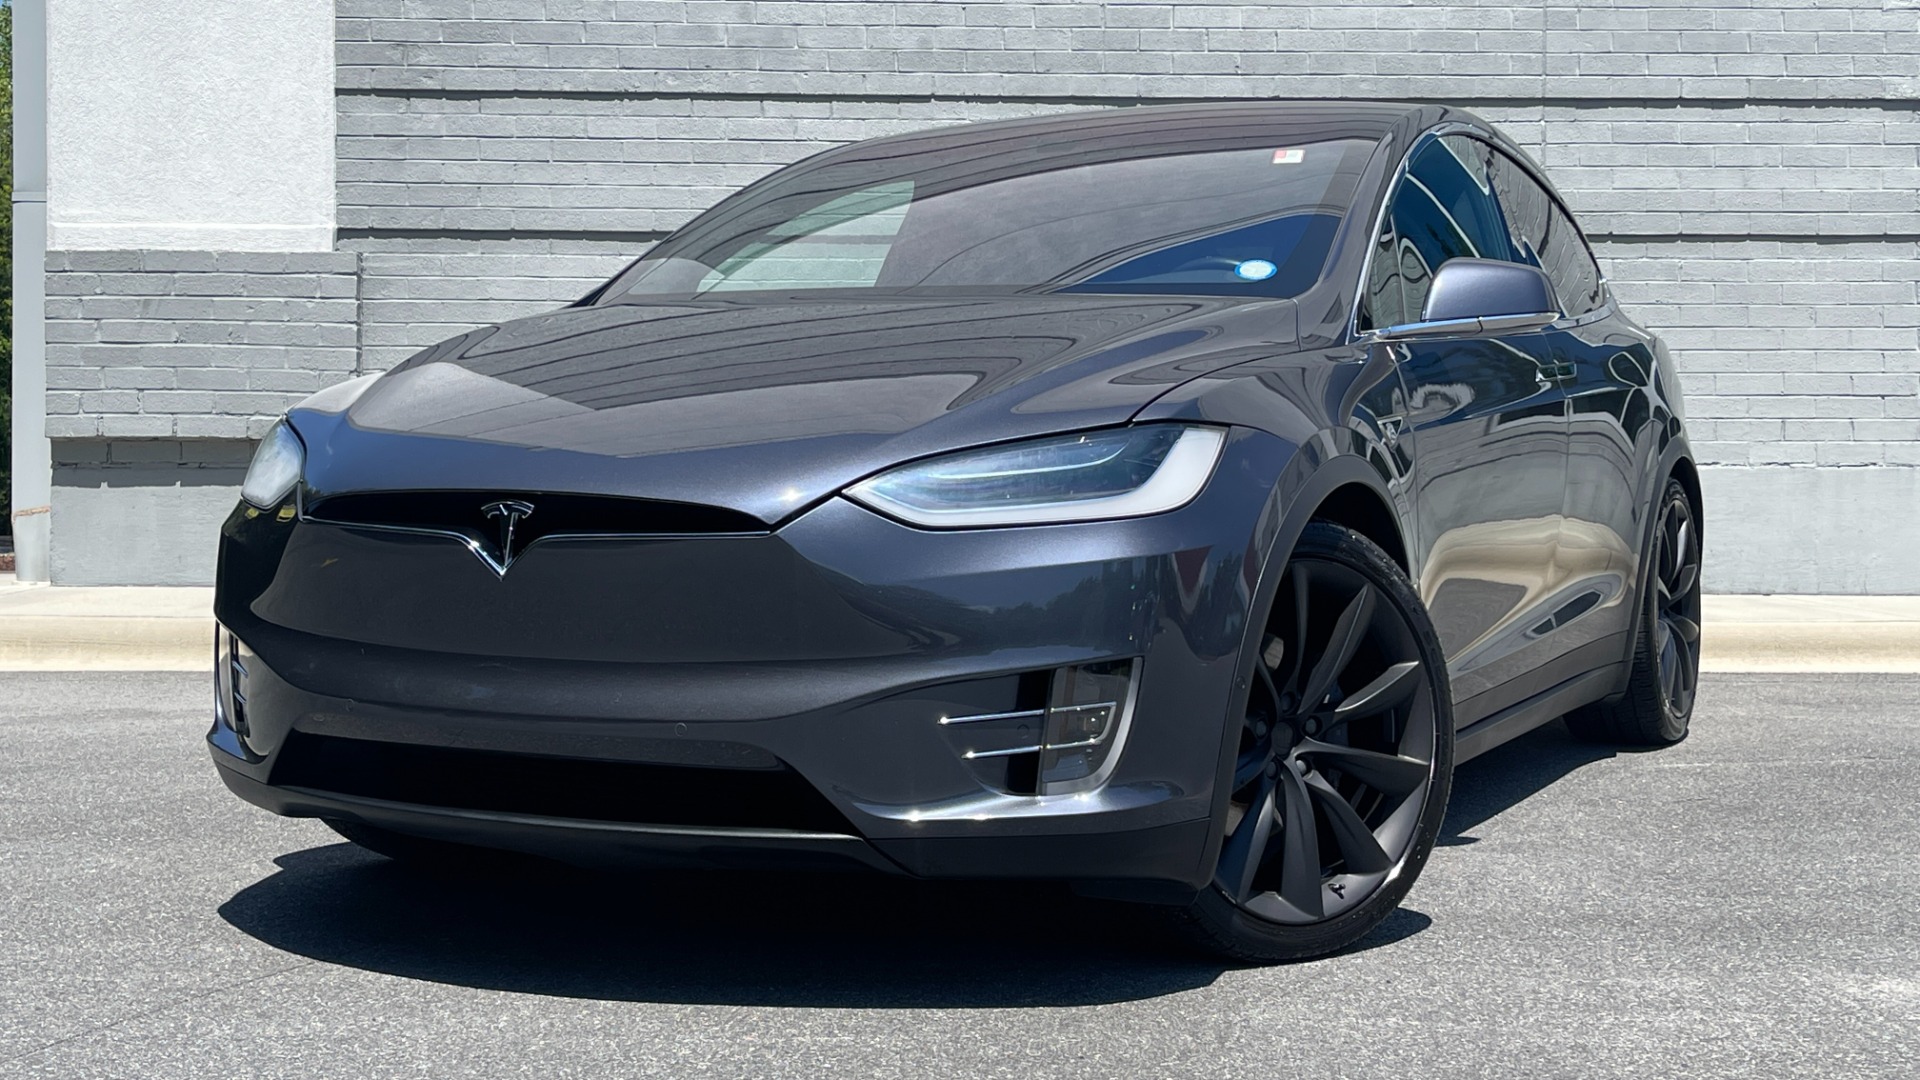 Used 2016 Tesla Model X 90D / AUTOPILOT / 3RD ROW / FALCON DOORS / ADJUSTABLE SUSPENSION for sale $62,995 at Formula Imports in Charlotte NC 28227 1